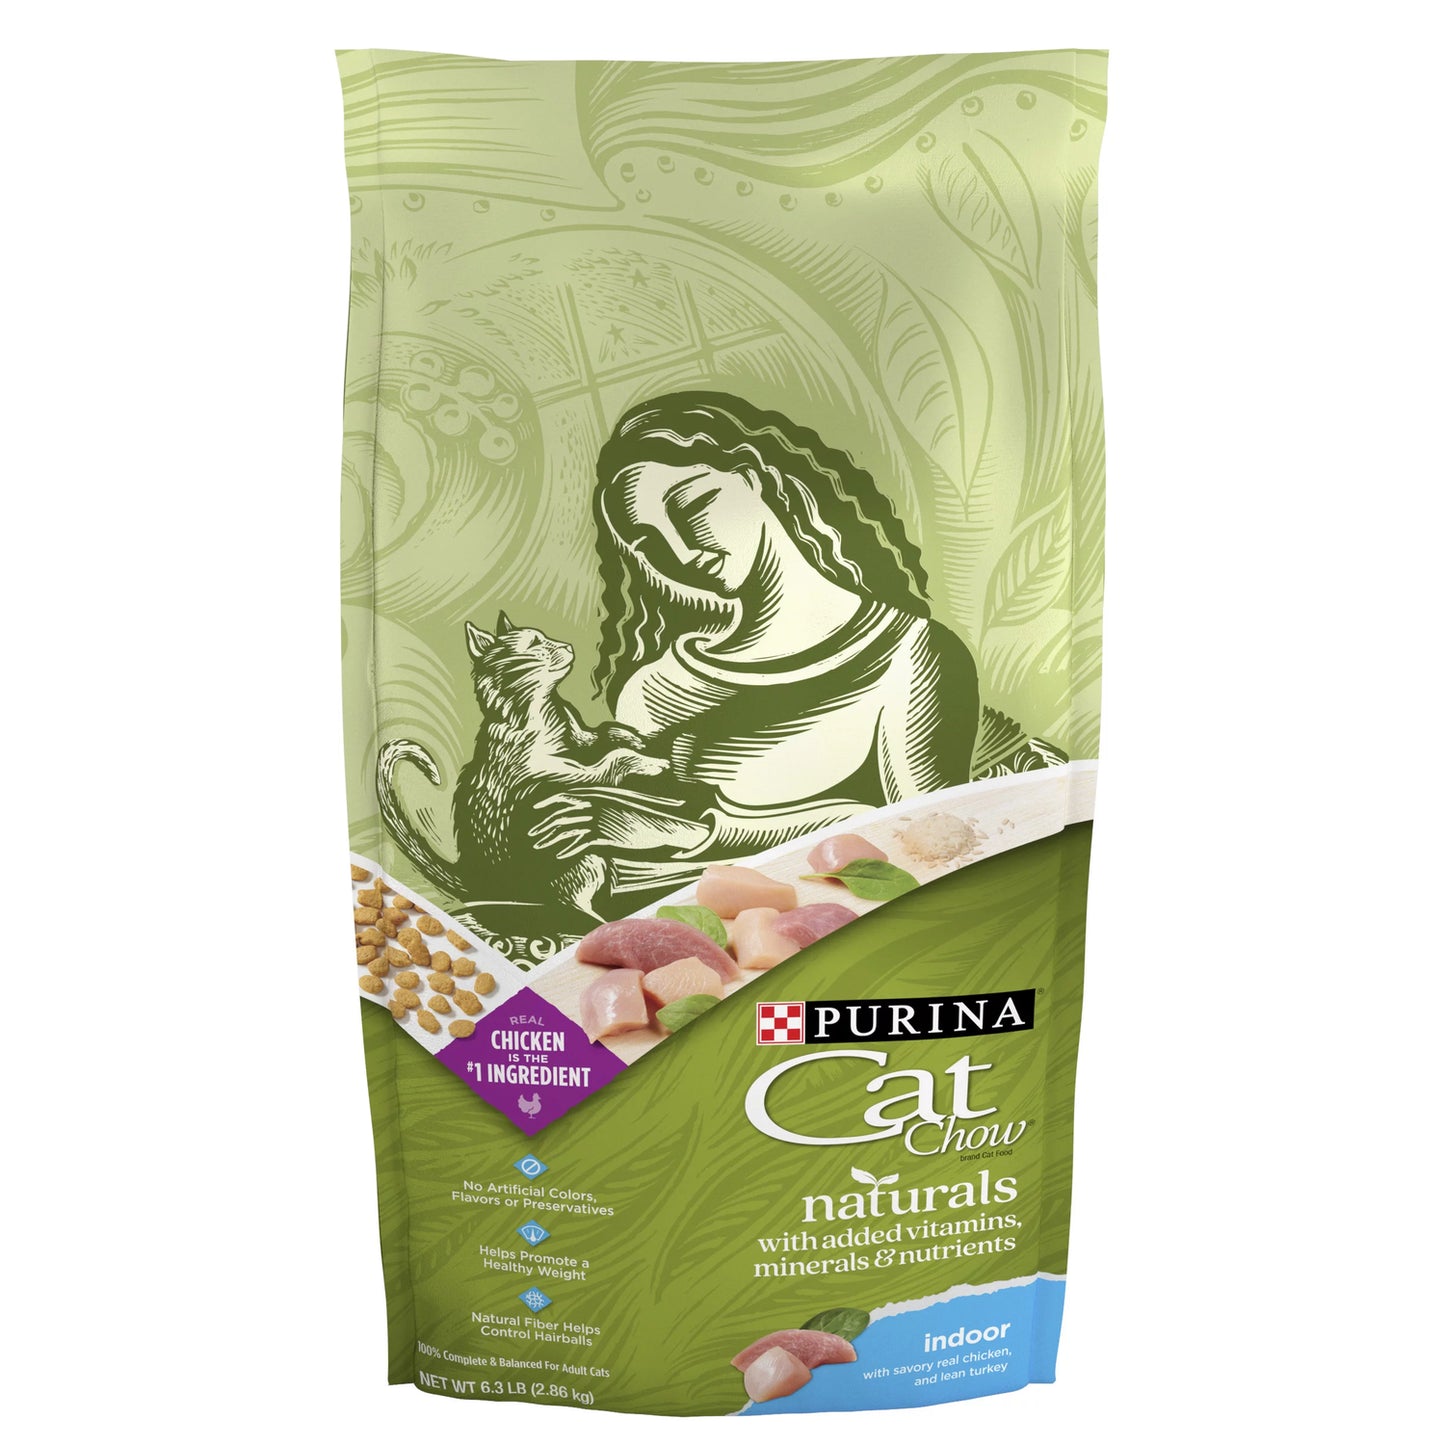 Purina Cat Chow Naturals, Dry Indoor Cat Food with Added Vitamins, Minerals and Nutrients, 6.3 Lb. Bag